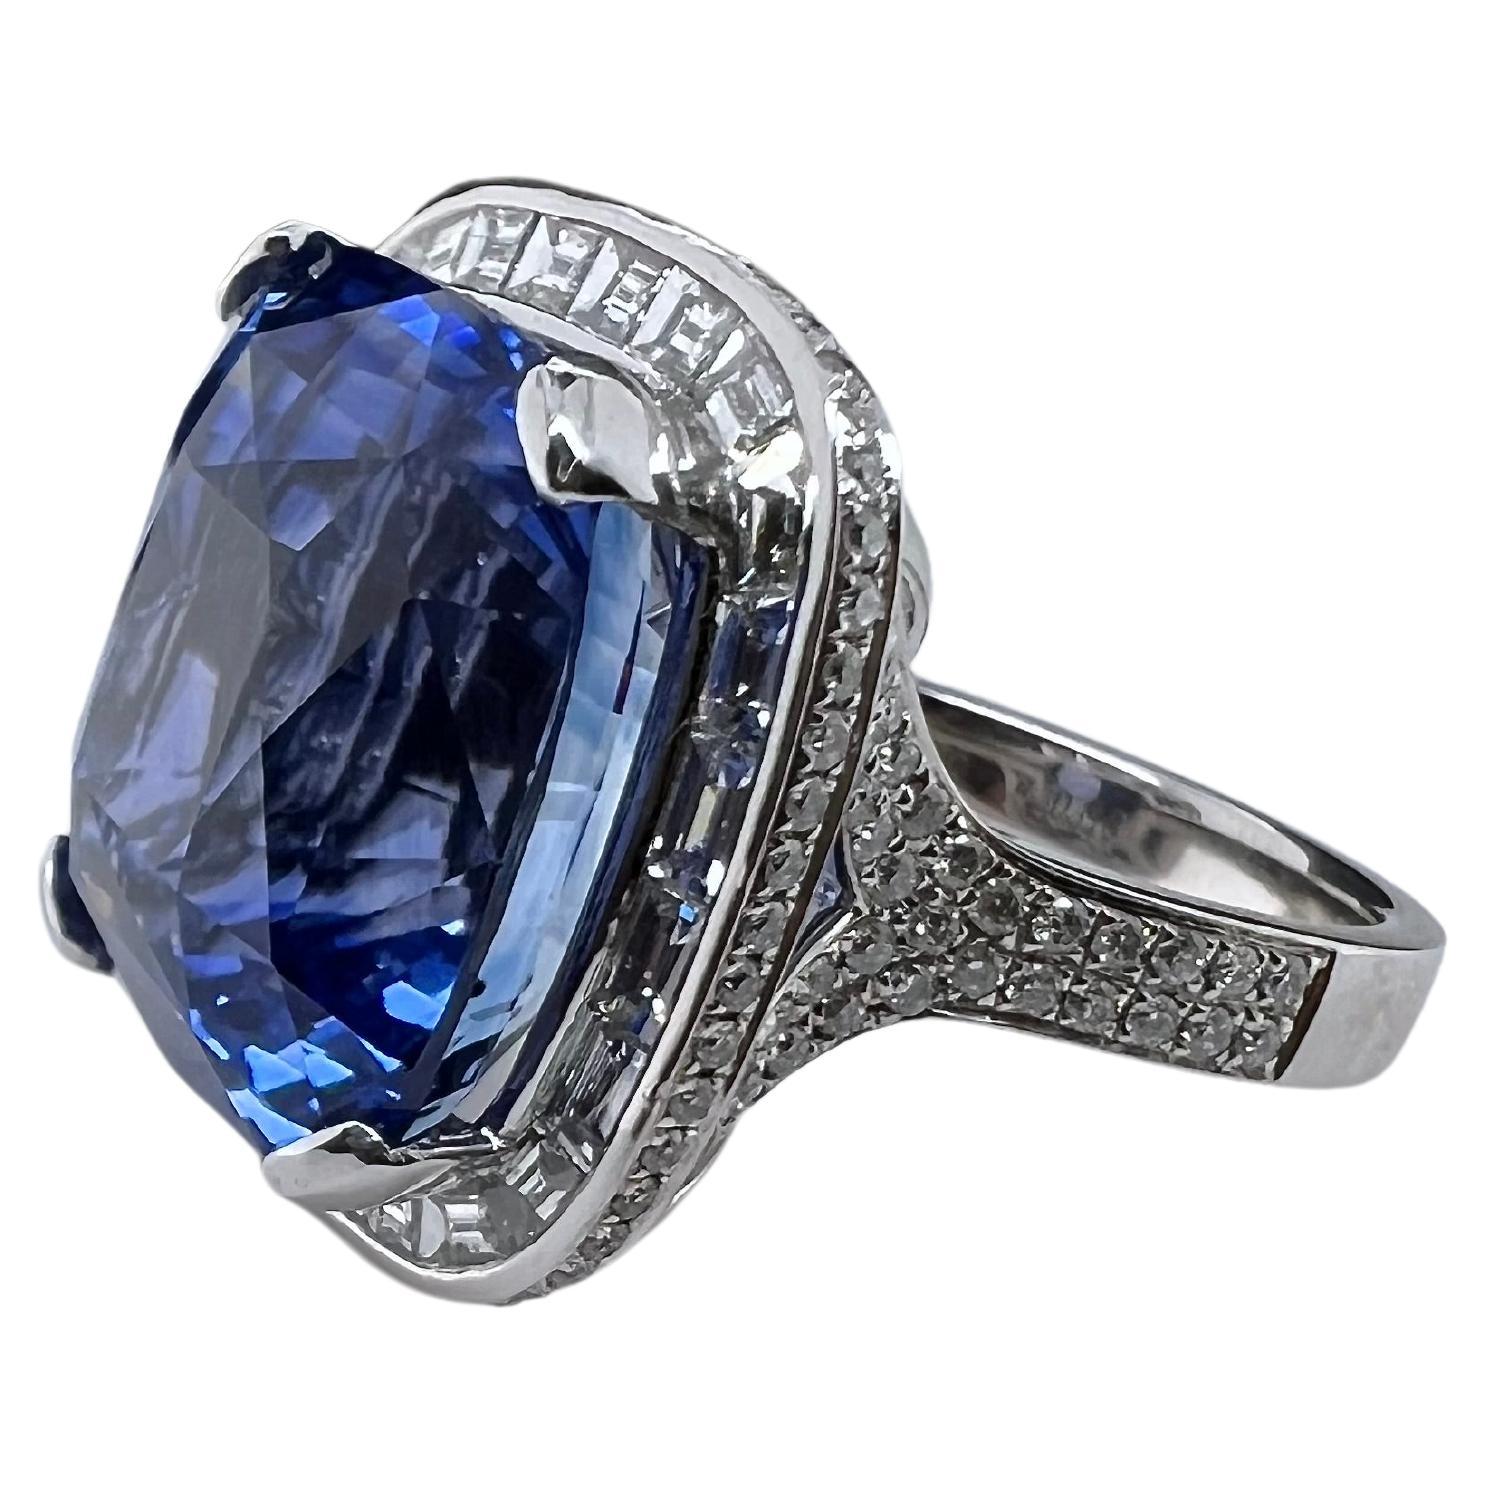 This phenomenal blue sapphire ring is an amazing piece for anyone's jewelry collection! The cutting on the vibrant blue sapphire is immaculate and sparkles in every angle. This heated sapphire comes accompanied with a GIA appraisal. The custom made